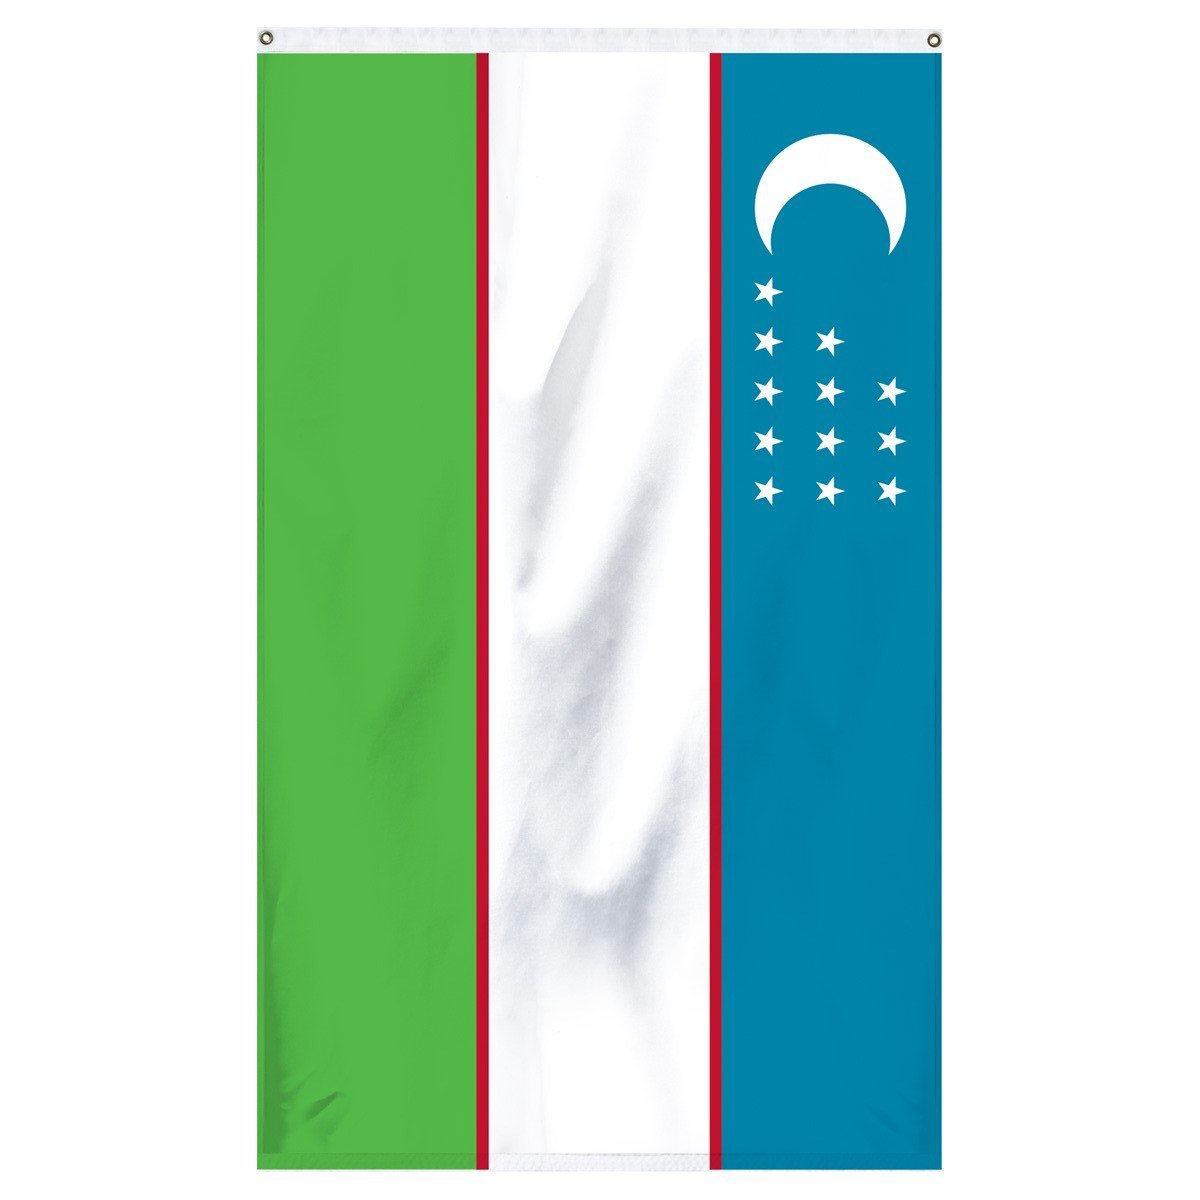 Uzbekistan National flag for sale to buy online from the American company Atlantic Flag and Pole. Blue, white, green and red stripped flag with a white crescent moon with 12 white stars.